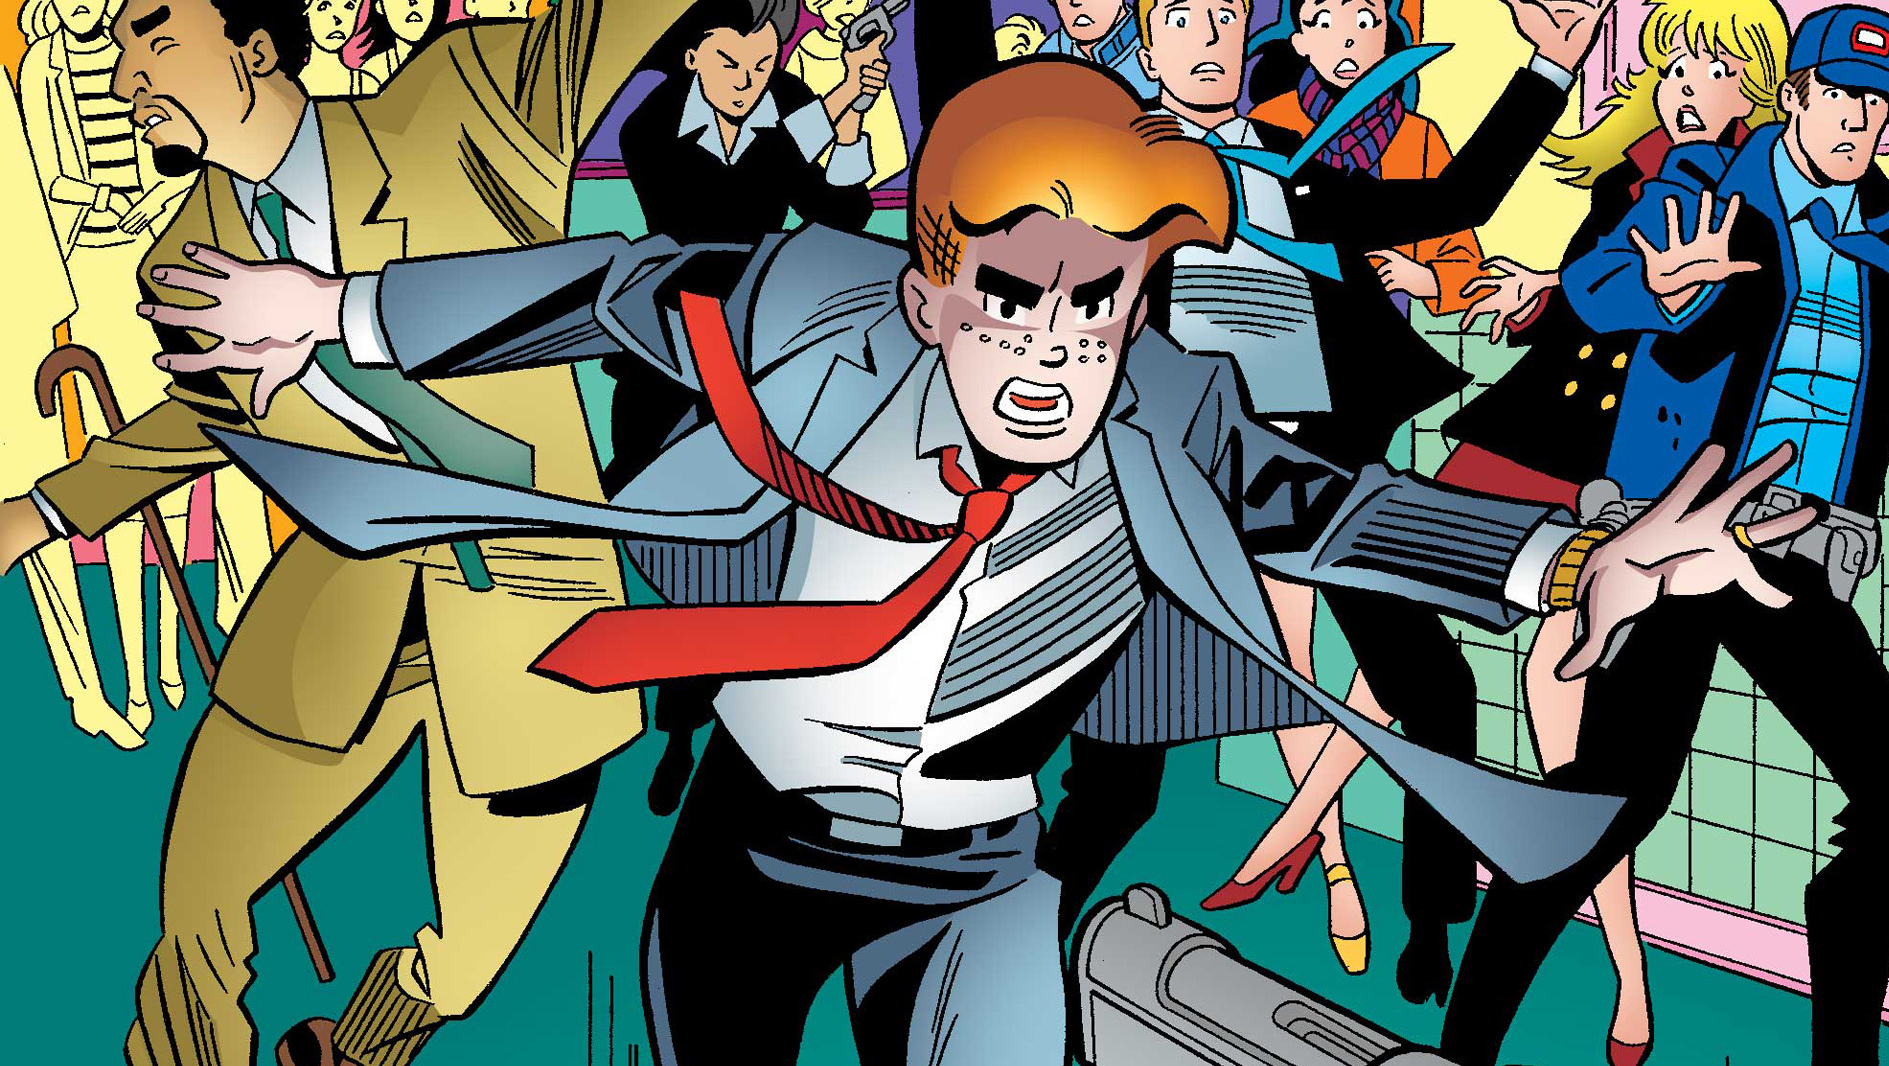 Archie To Be Shot Saving Gay Friend In Comic Book Cbs News